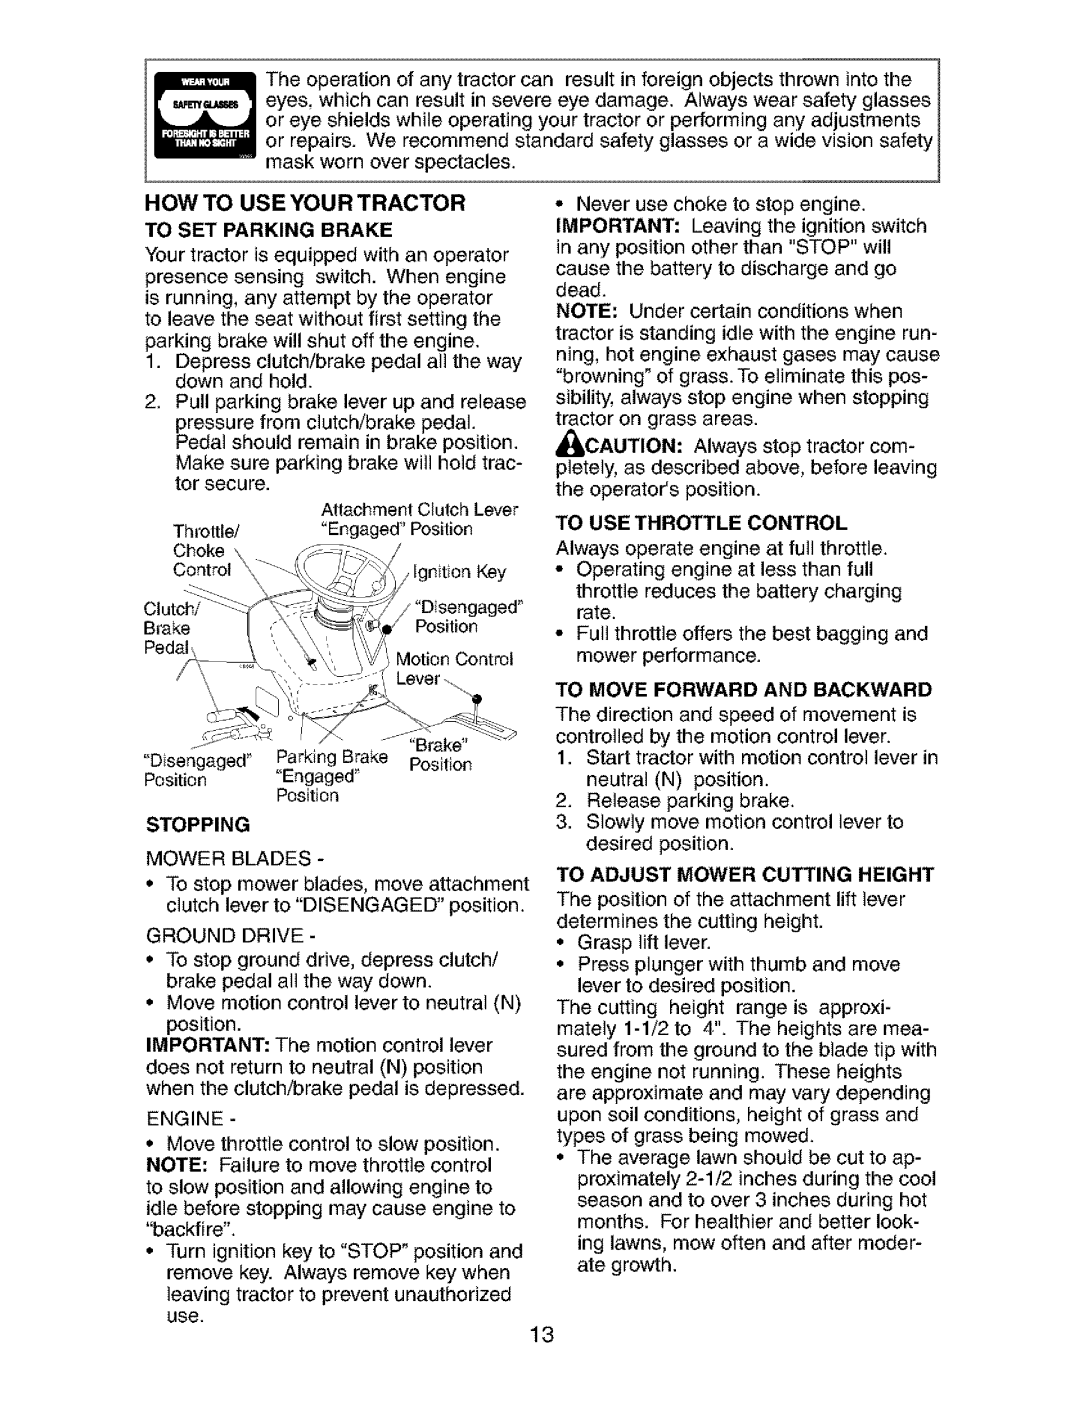 Craftsman 917.273823 owner manual How To Use Your Tractor, To Adjust Mower Cutting Height 